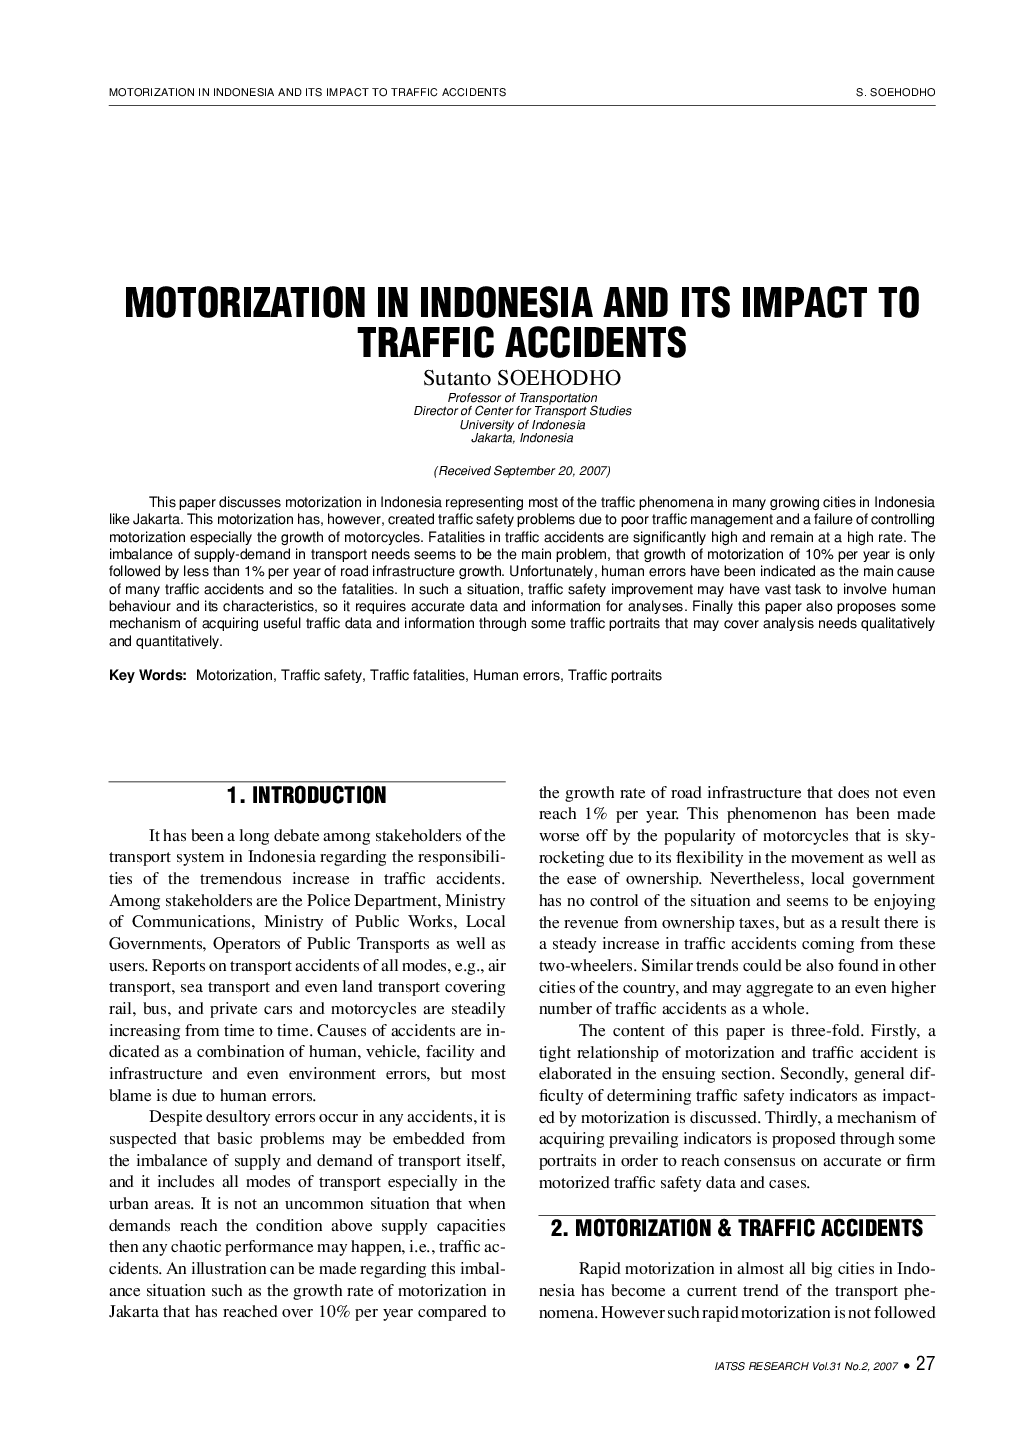 MOTORIZATION IN INDONESIA AND ITS IMPACT TO TRAFFIC ACCIDENTS